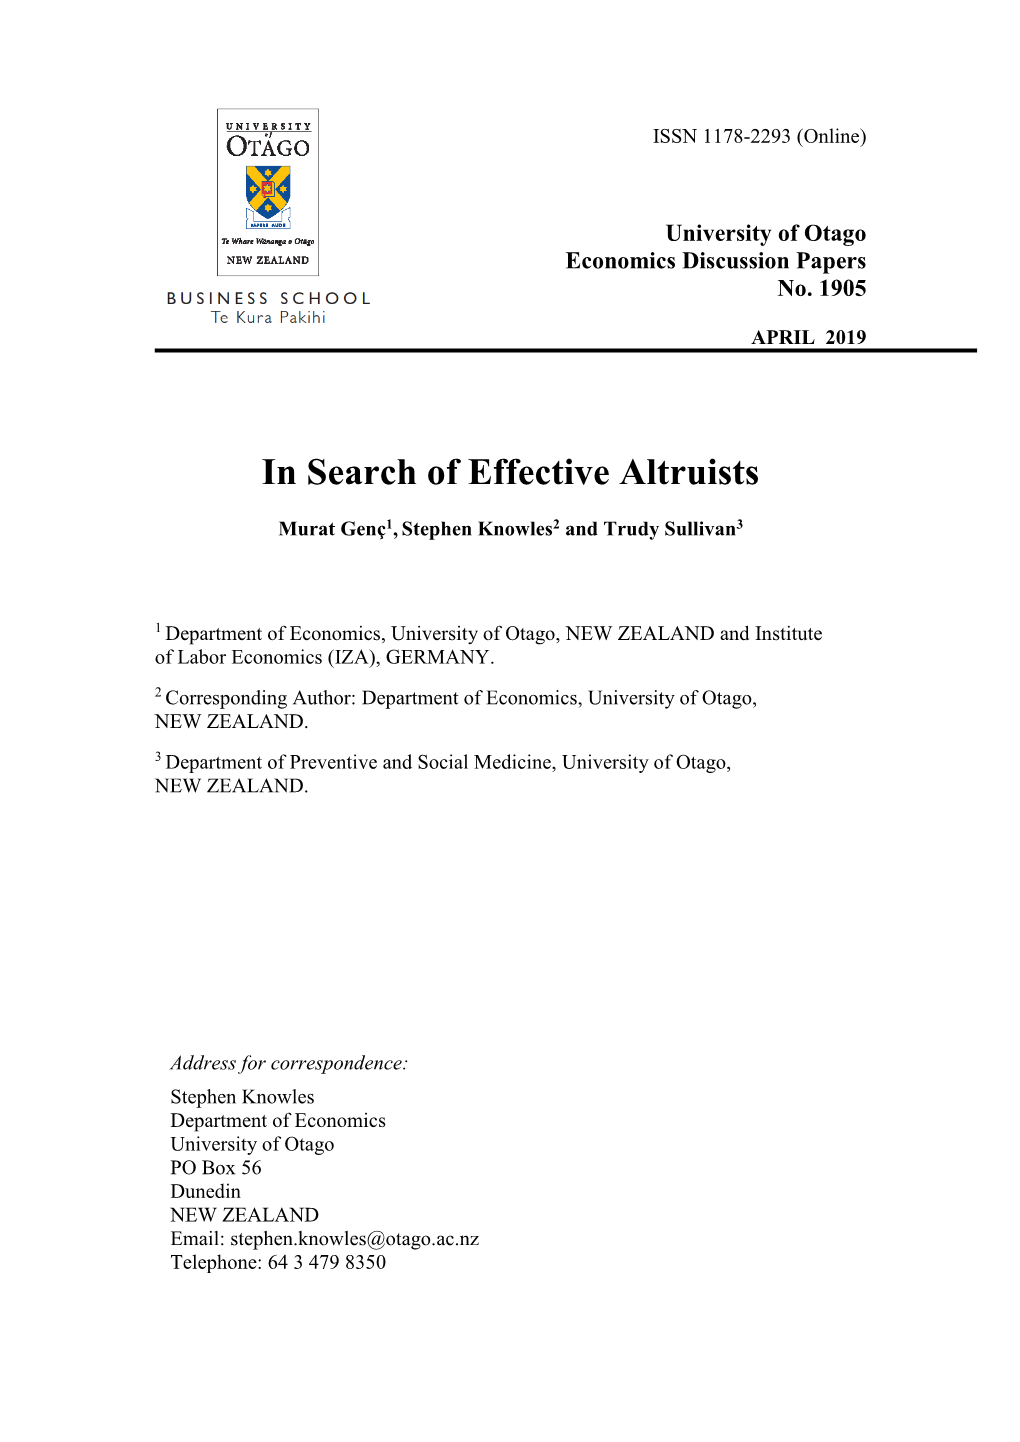 In Search of Effective Altruists